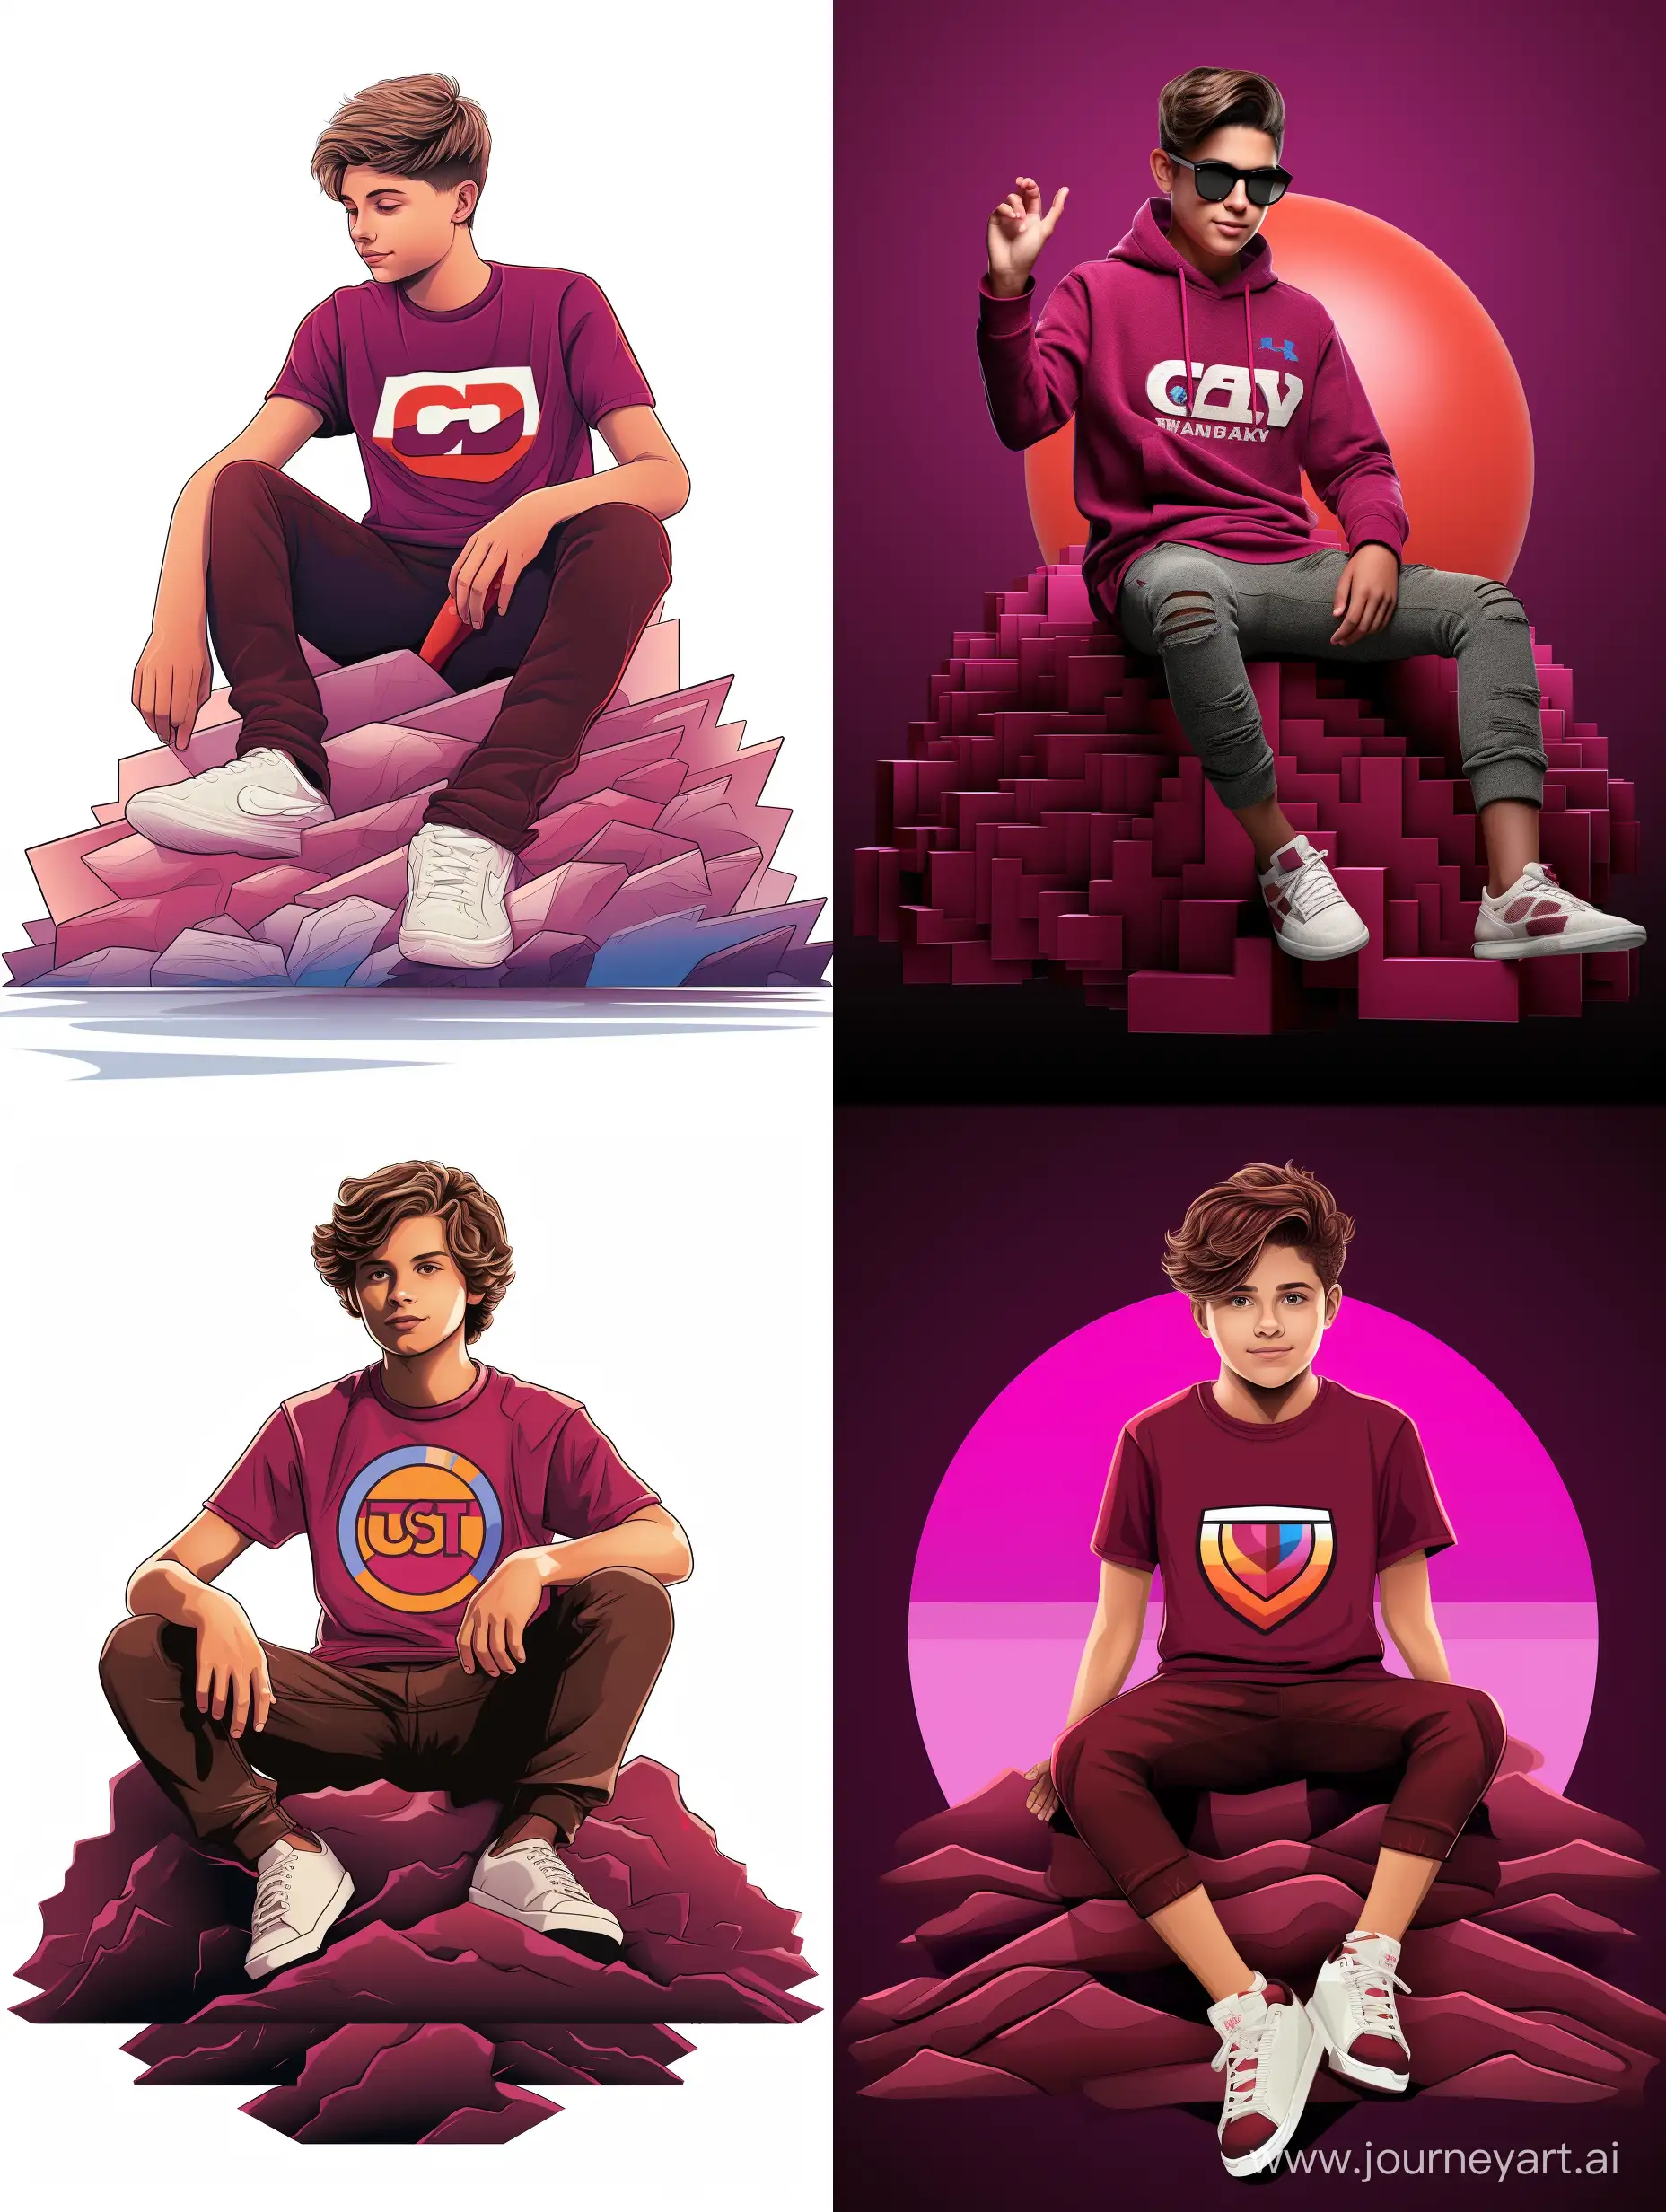 Casual-Teen-Boy-on-Instagram-Logo-with-Cherry-Name-Printed-Tshirt